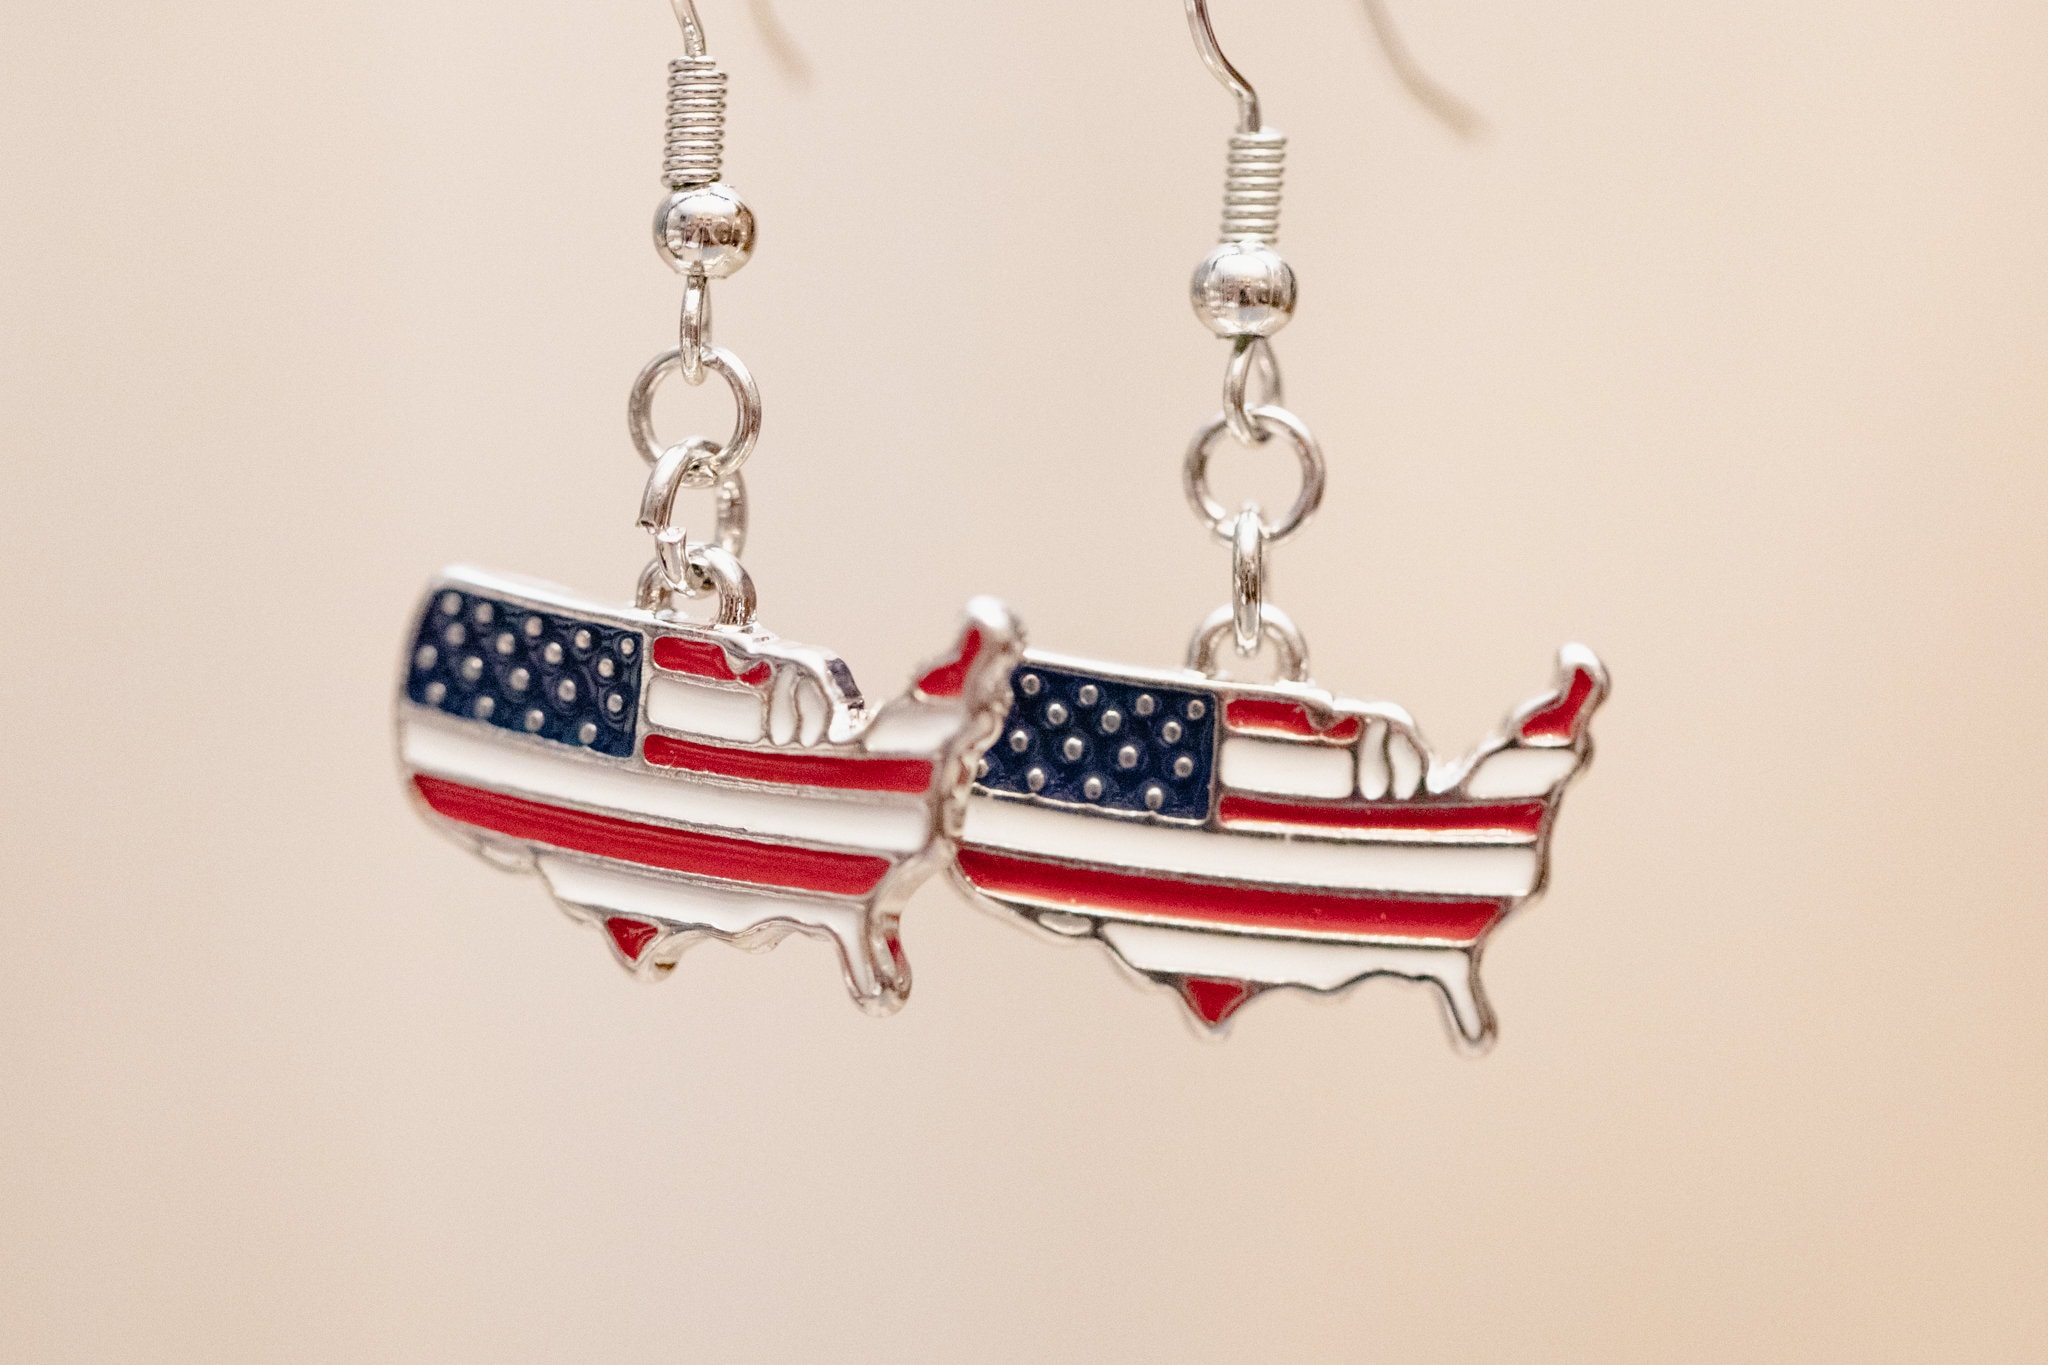 Buy Red White and Blue Earrings, USA Earrings, 4th July Earrings,  Patriotic, American Flag Earrings, Freedom, Independence Day Gift Online in  India - Etsy